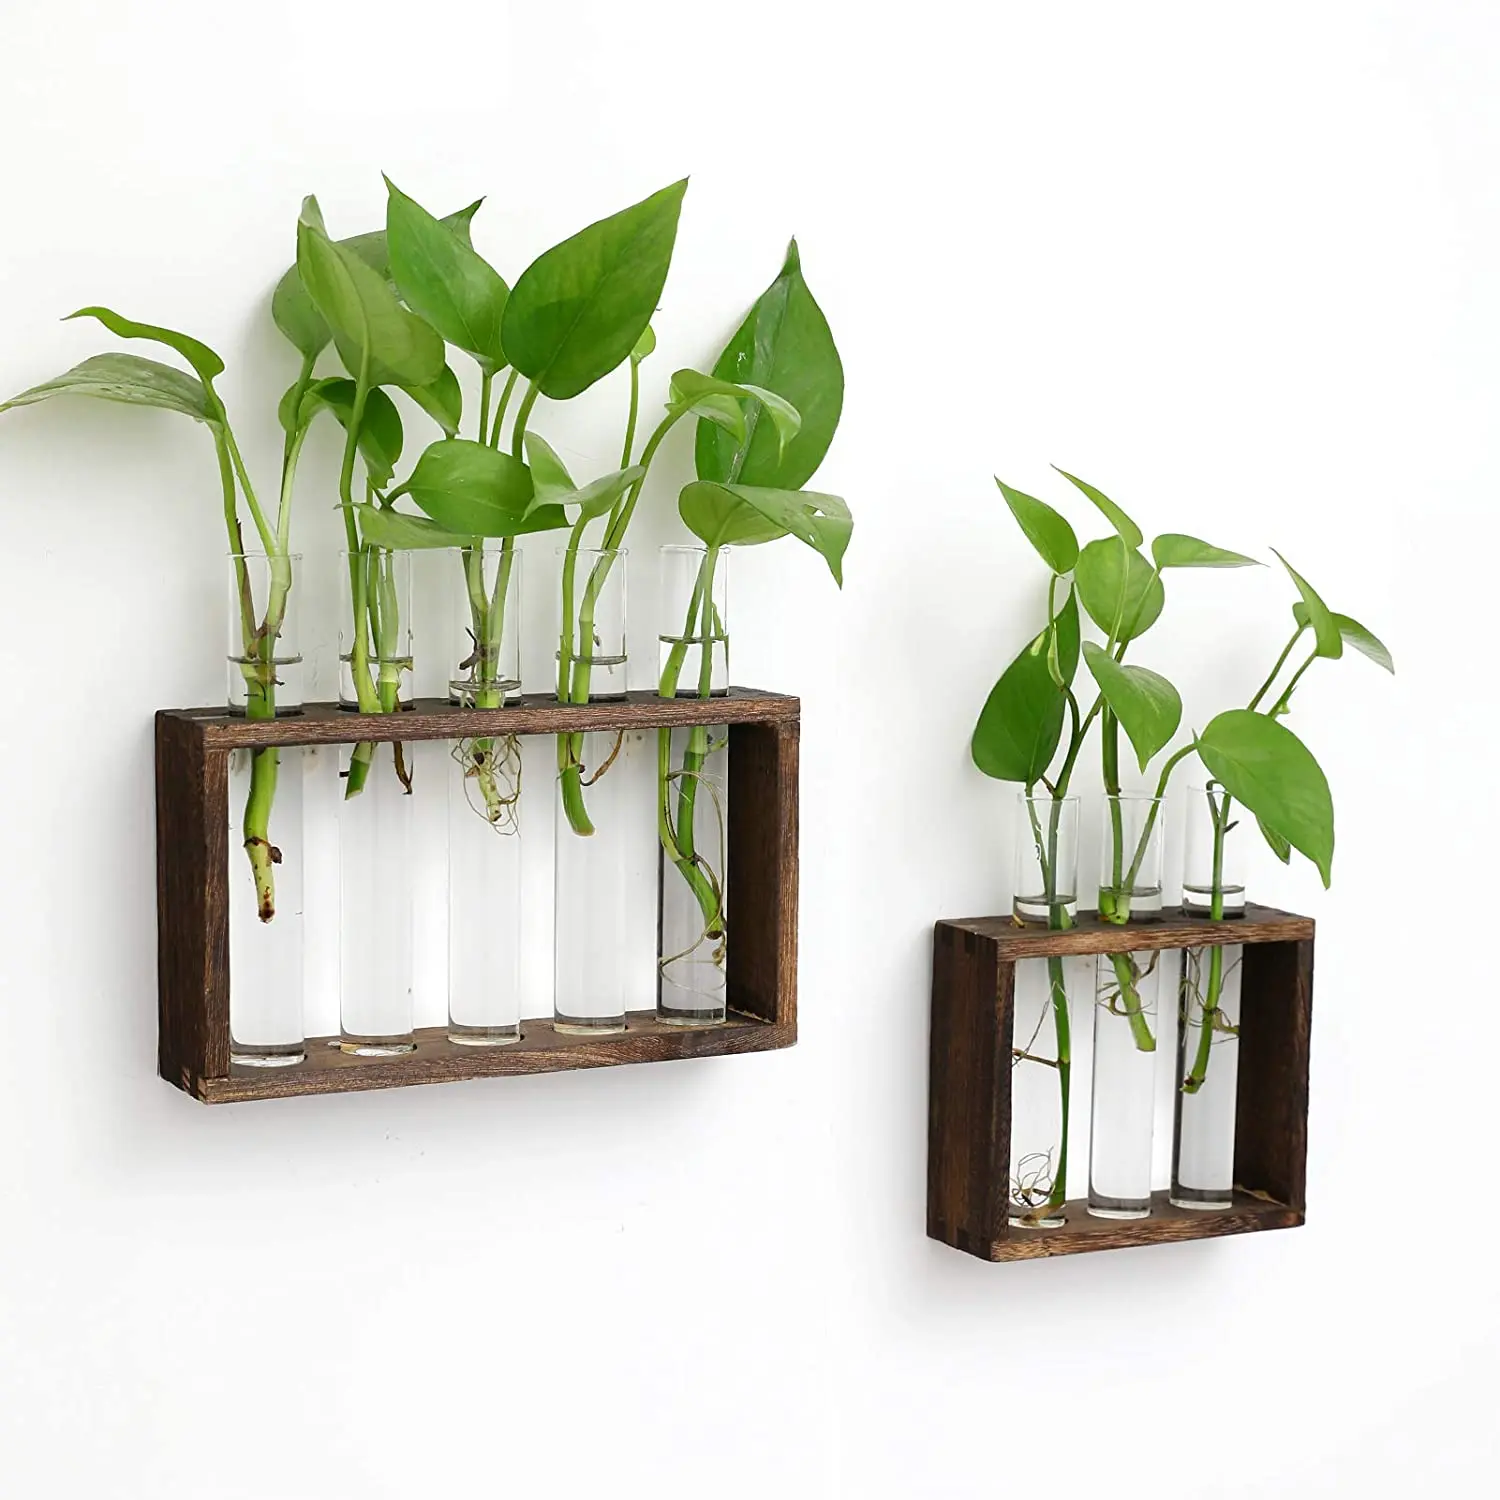 Banord Desktop Glass Terrarium Wall Hanging Glass Planter with 3 Modern Test Tubes in Wood Stand Dark Brown Tabletop Tube Container for Home Office Decoration 